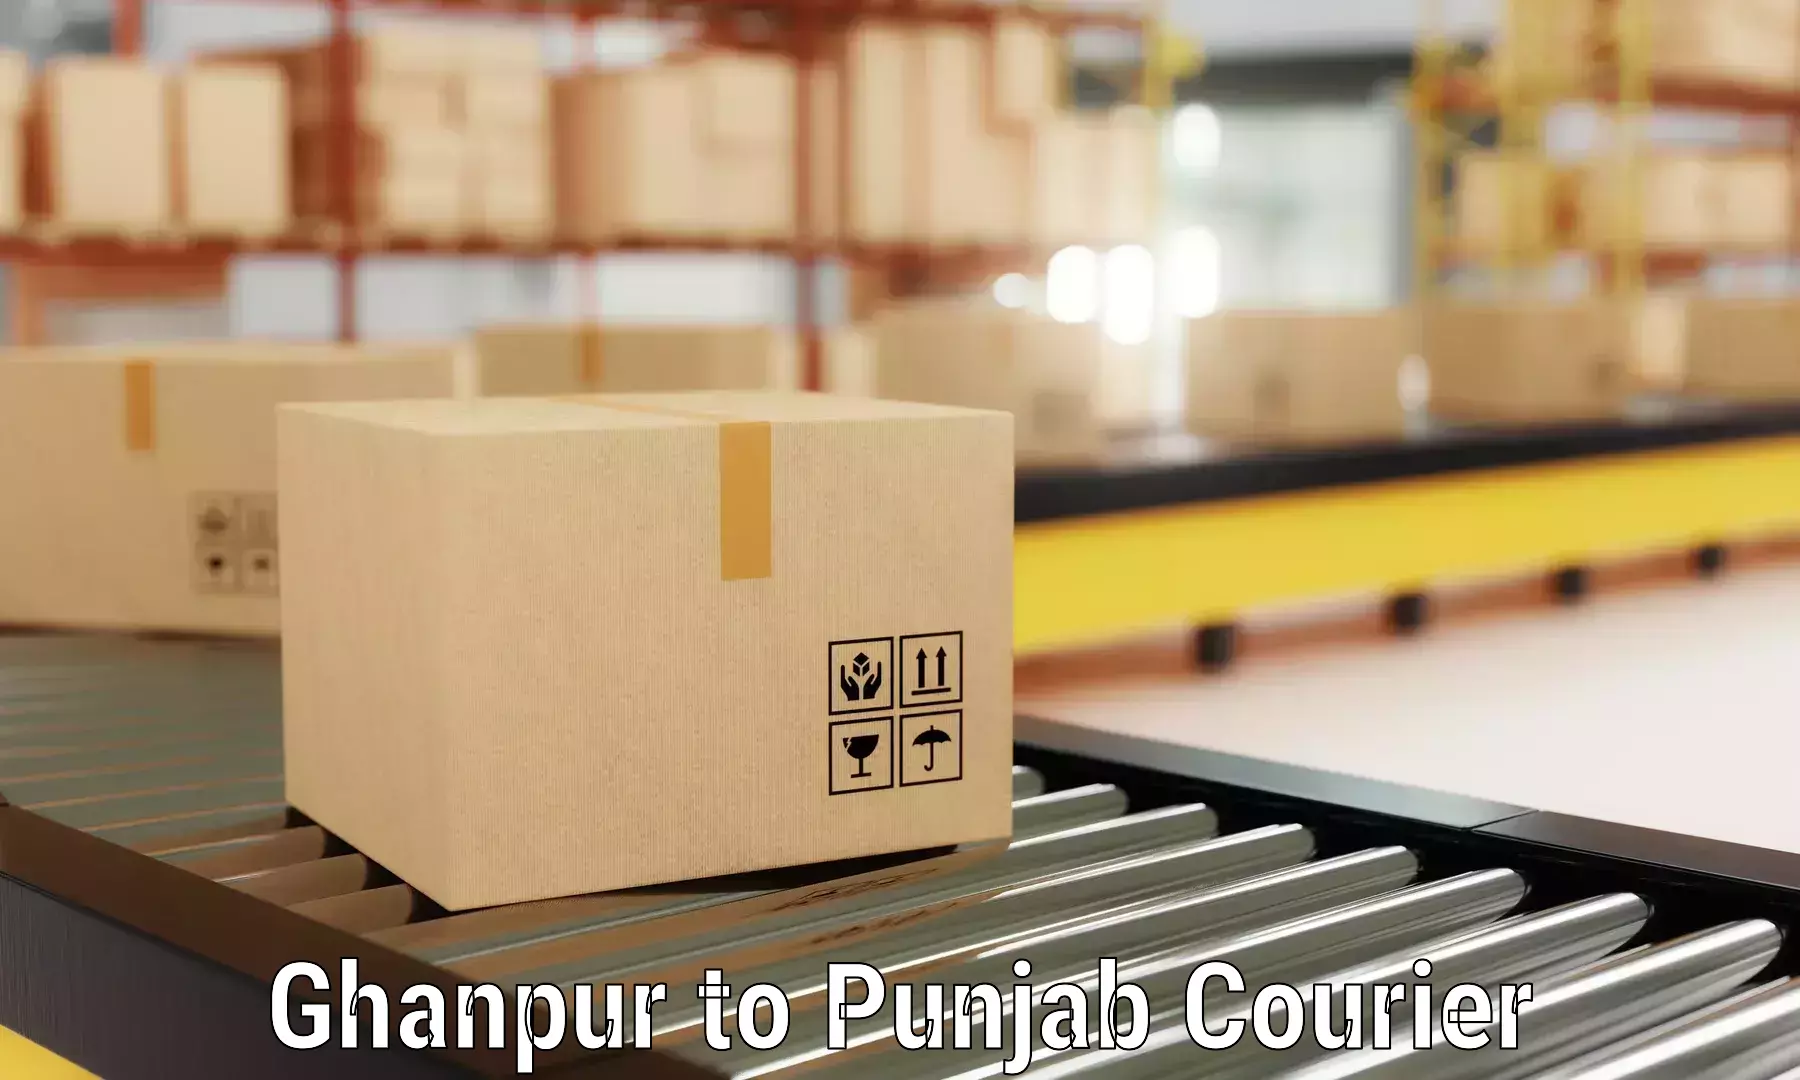 Trusted relocation experts Ghanpur to Ropar